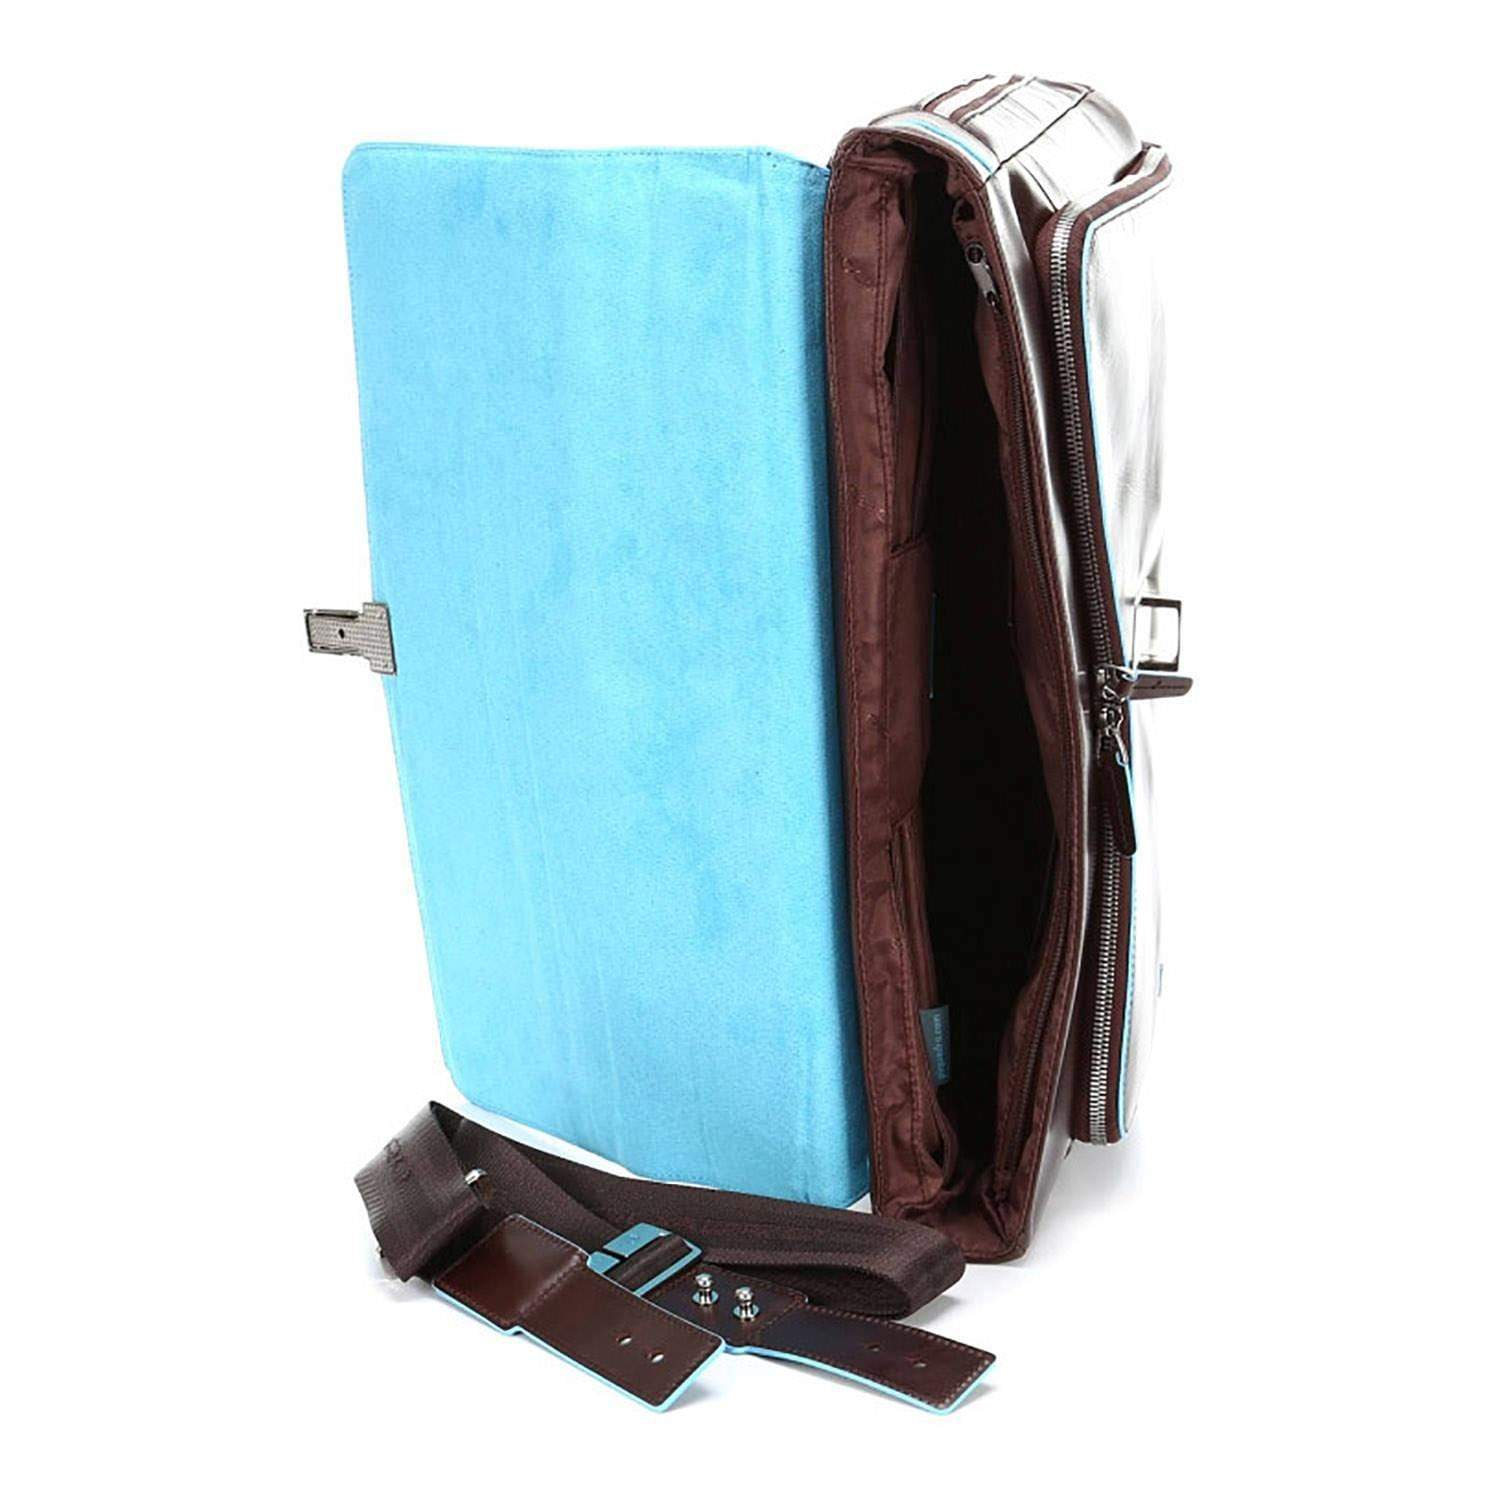 Piquadro Blue Square Leather Briefcase with Flap Closure - Mahogany - CA3111B2/MO - Jashanmal Home